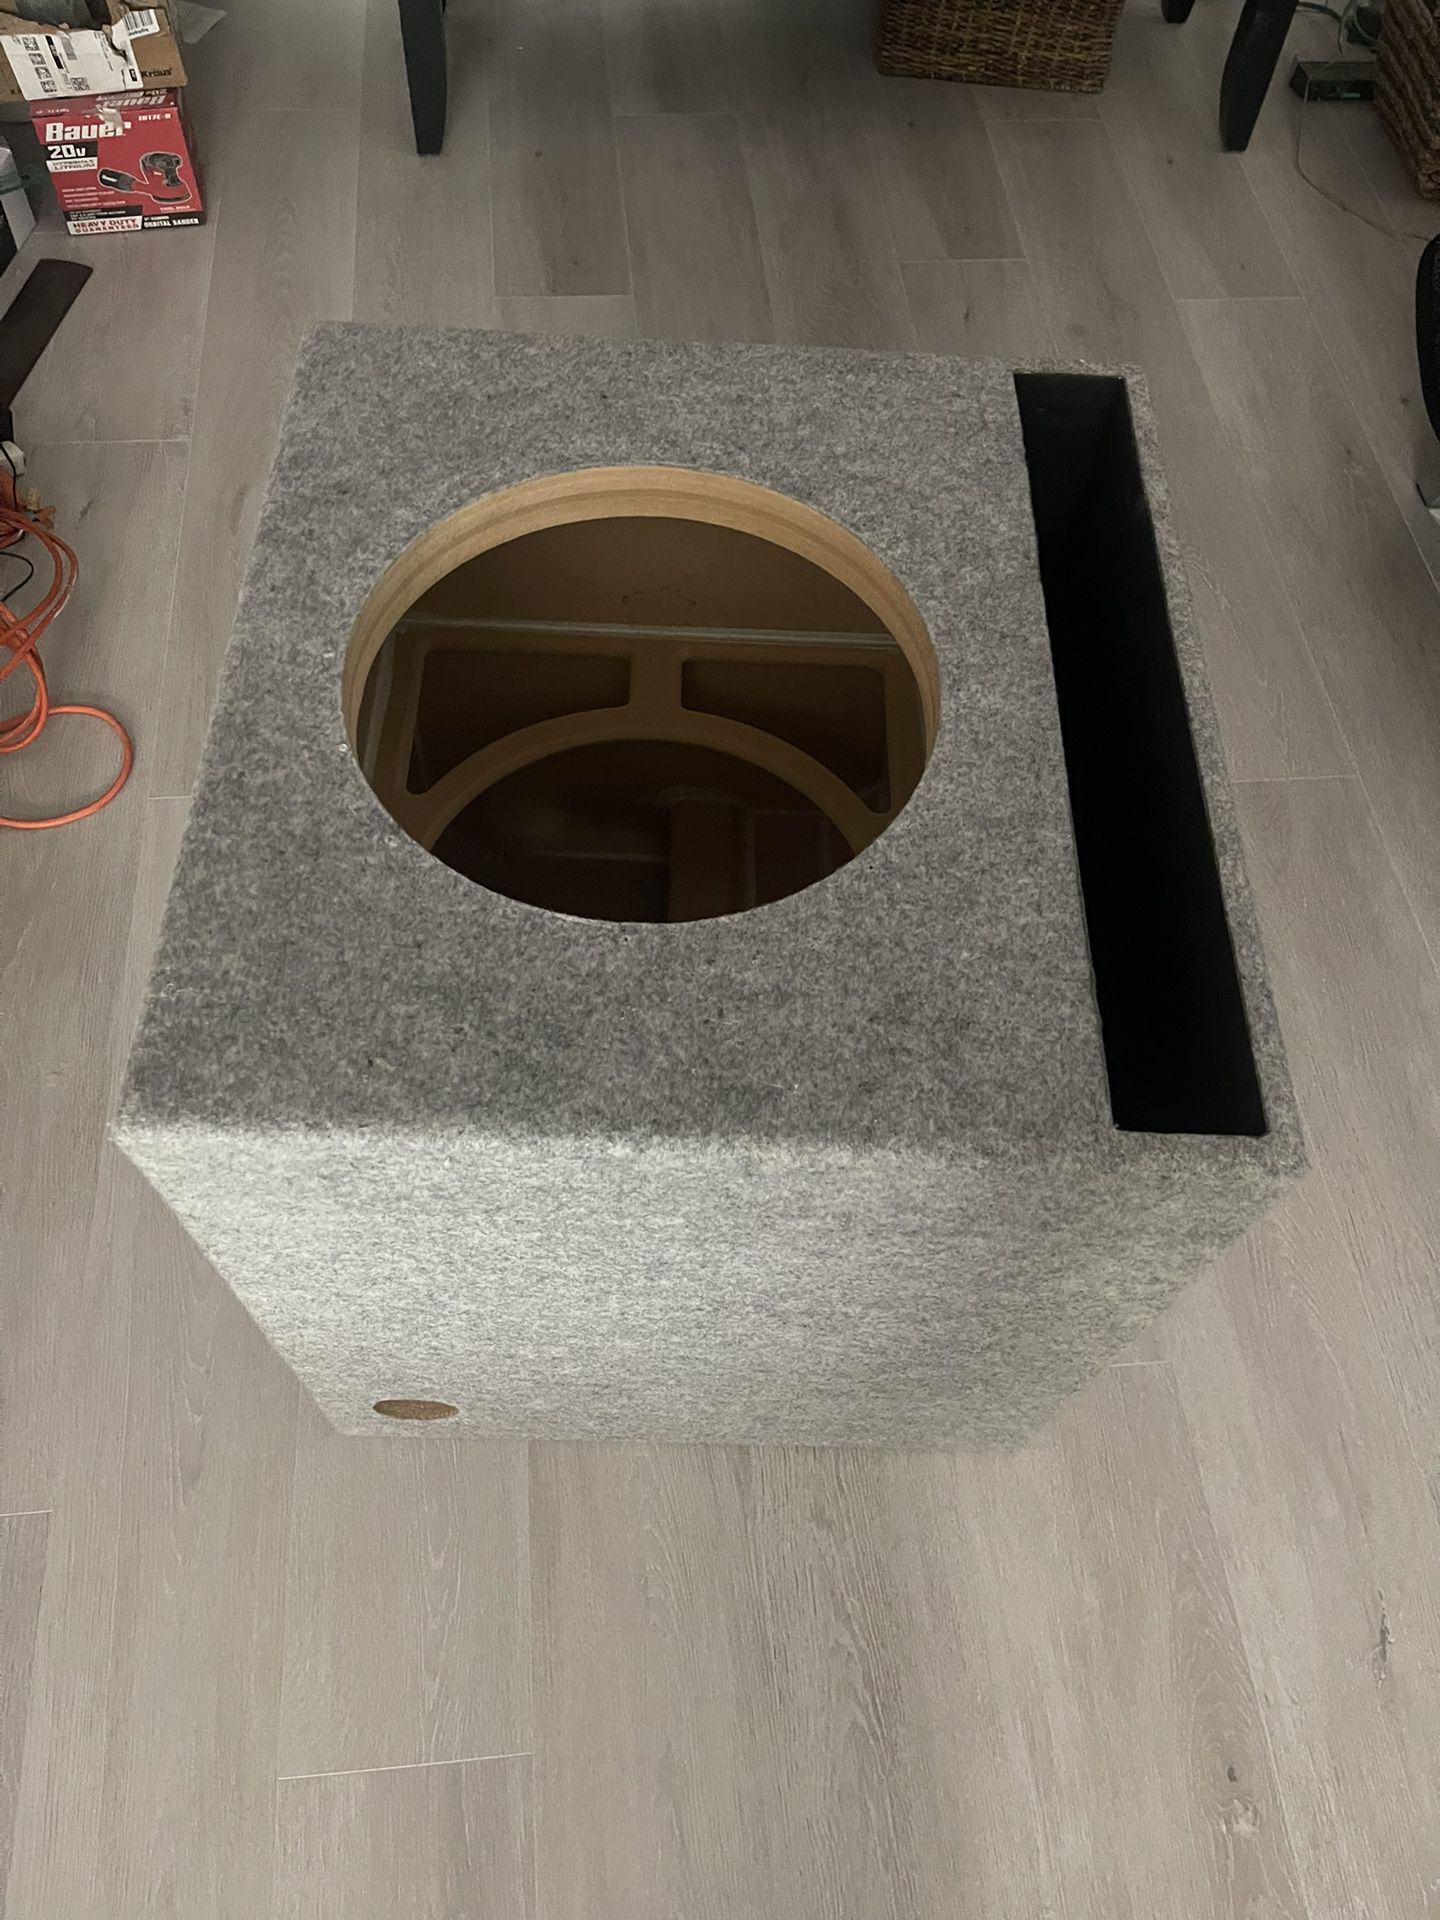 15inch Subwoofer Box 